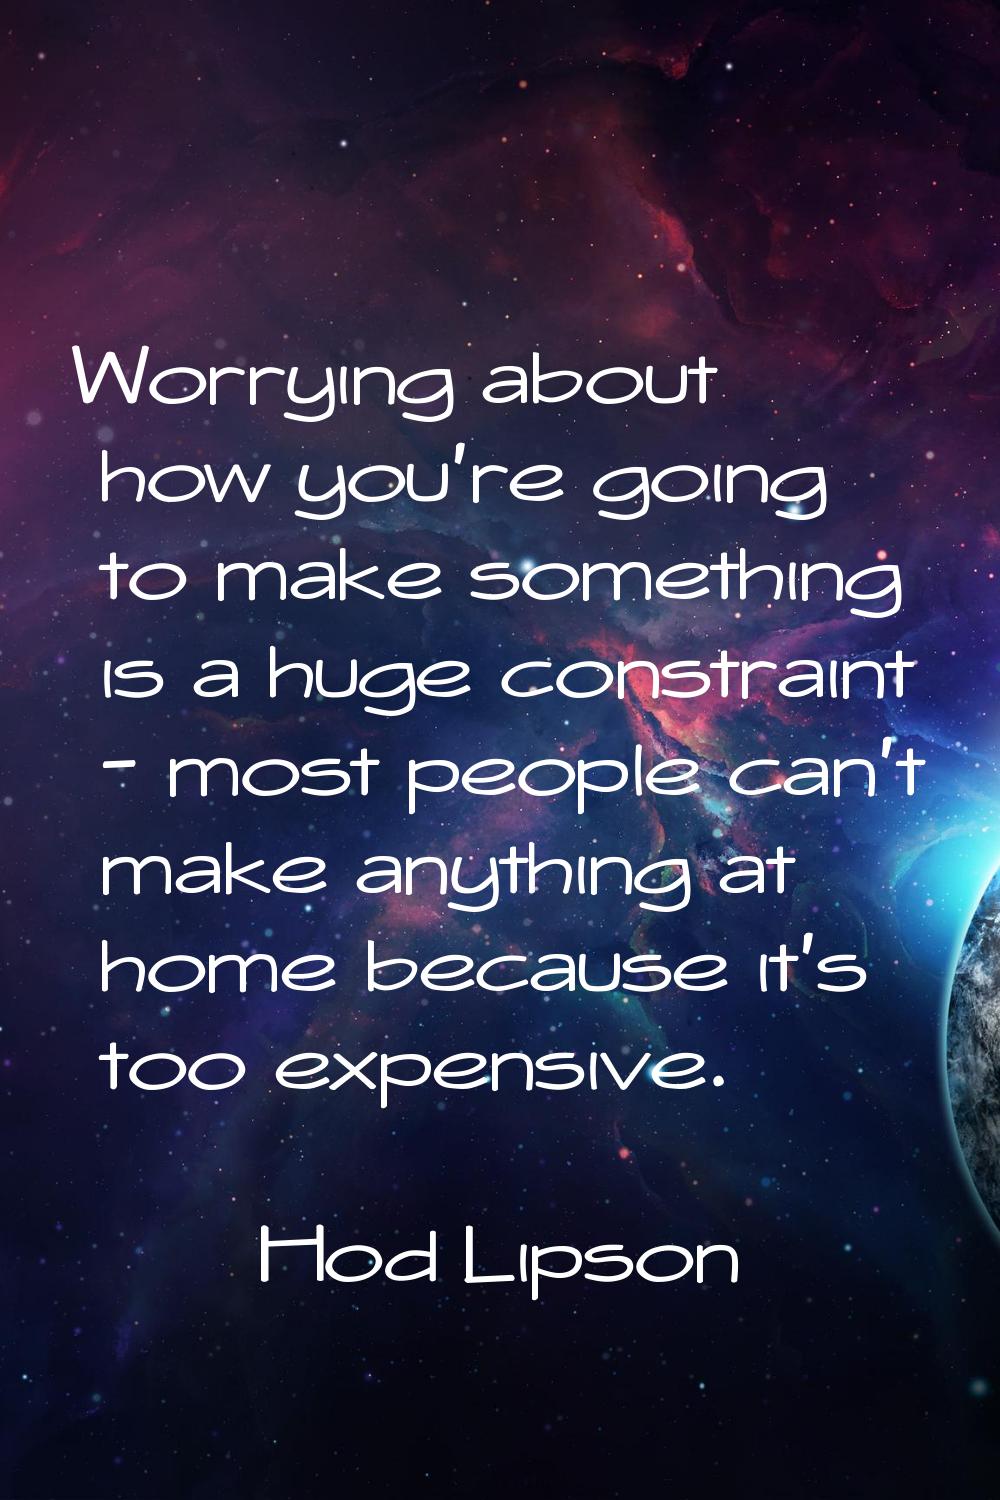 Worrying about how you're going to make something is a huge constraint - most people can't make any